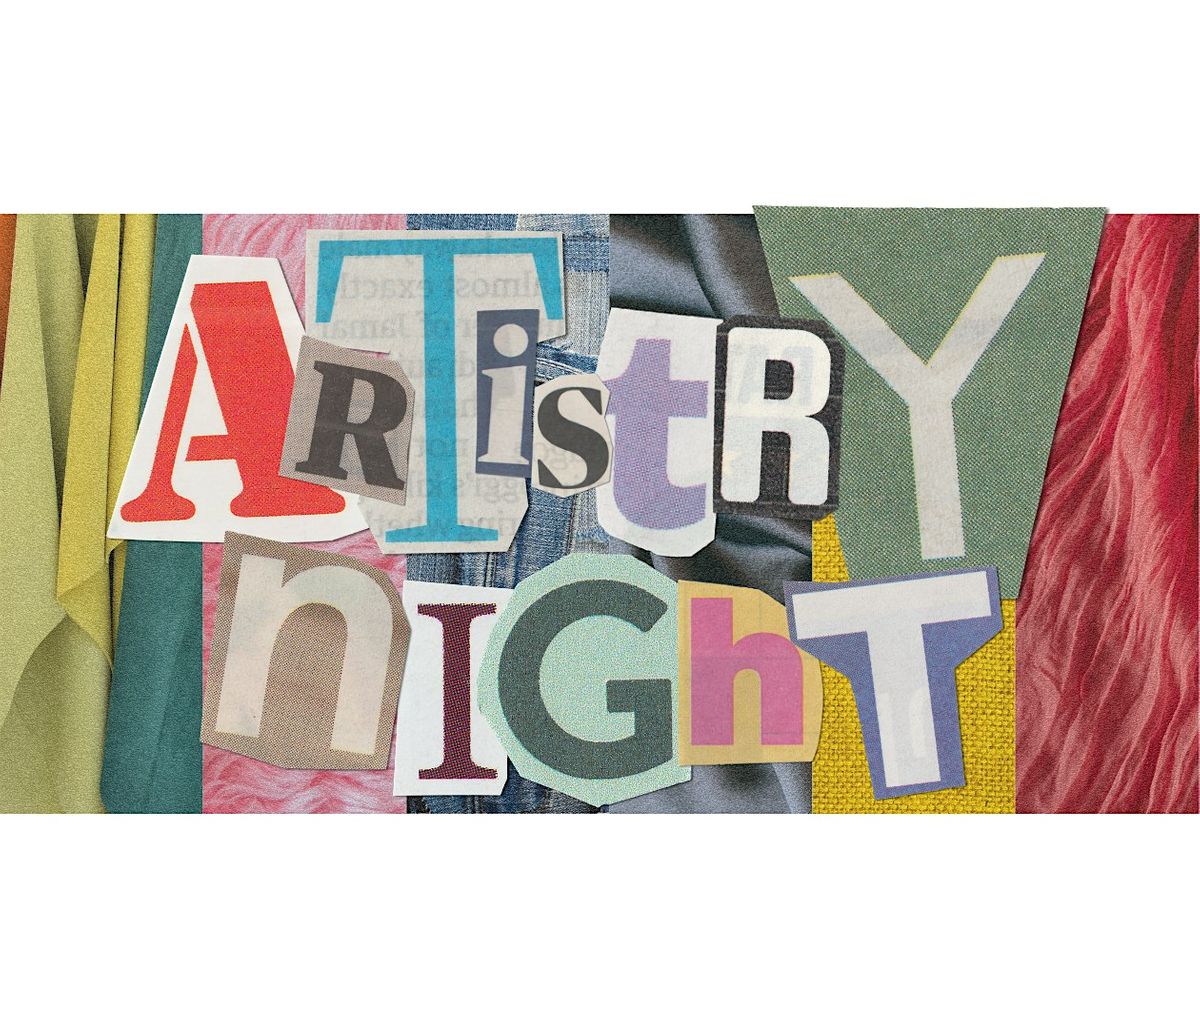 My Creative Space Presents: Artistry Night